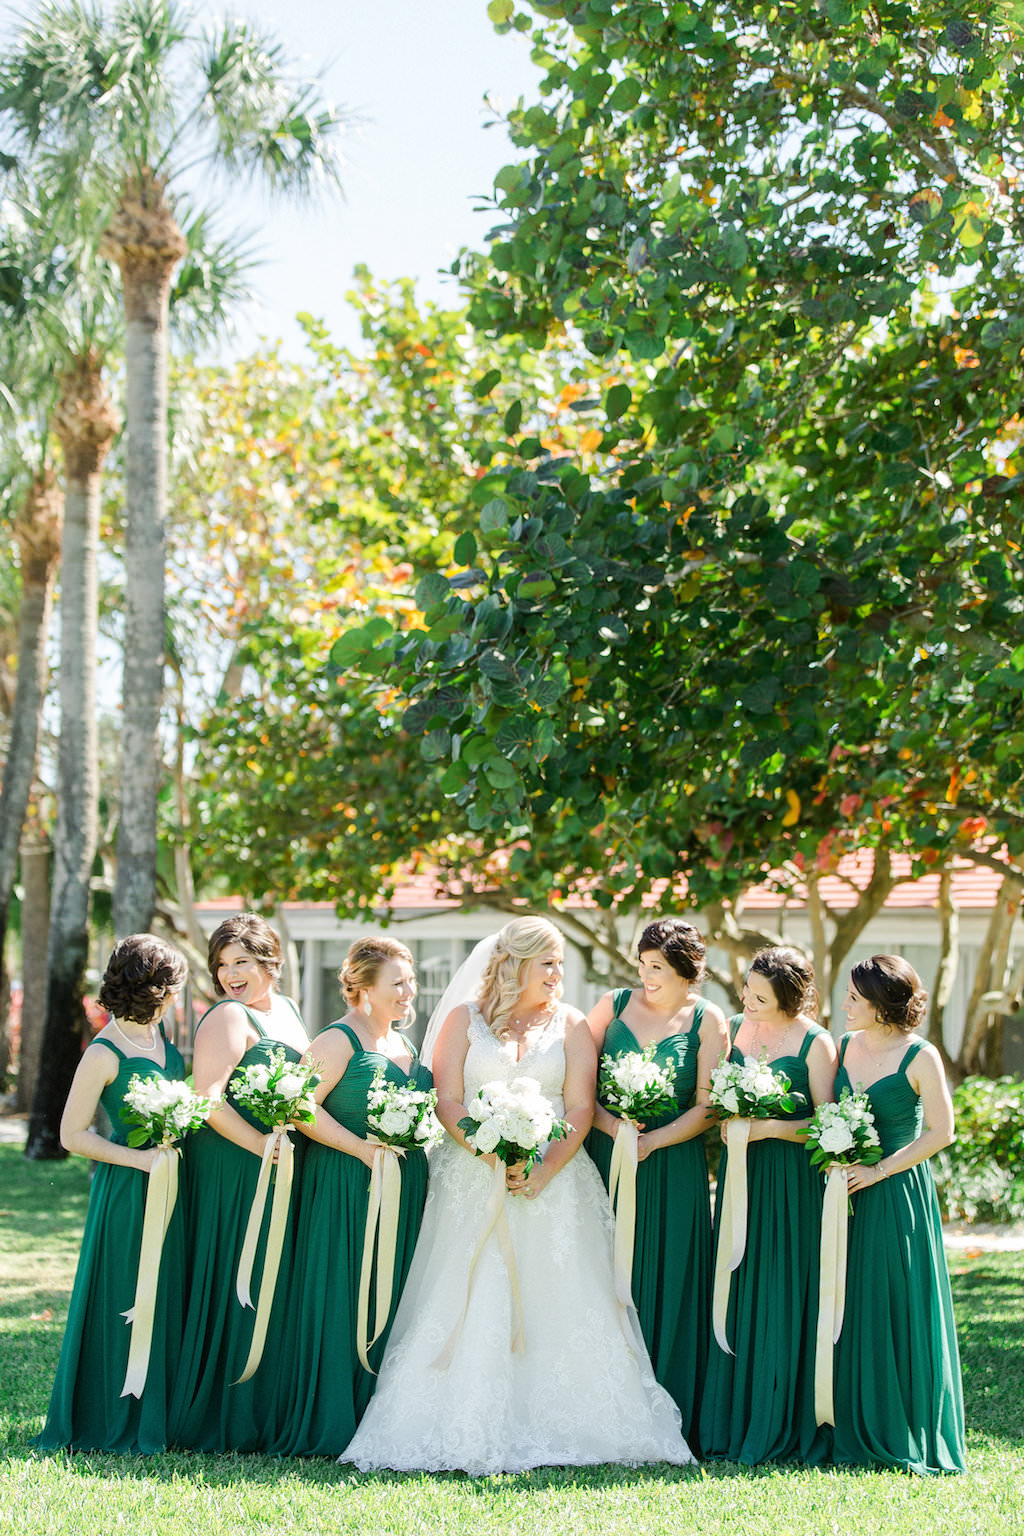 White, Gold and Green Old Florida Inspired Wedding Party Outdoor Garden Portrait, Bridesmaids in Watters Dresses, Bride in V Neck Morilee by Madeline Gardner Wedding Dress, with White Floral Bouquets with Greenery and Long Gold Ribbons | Tampa Bay Wedding Photographer Ailyn La Torre Photography